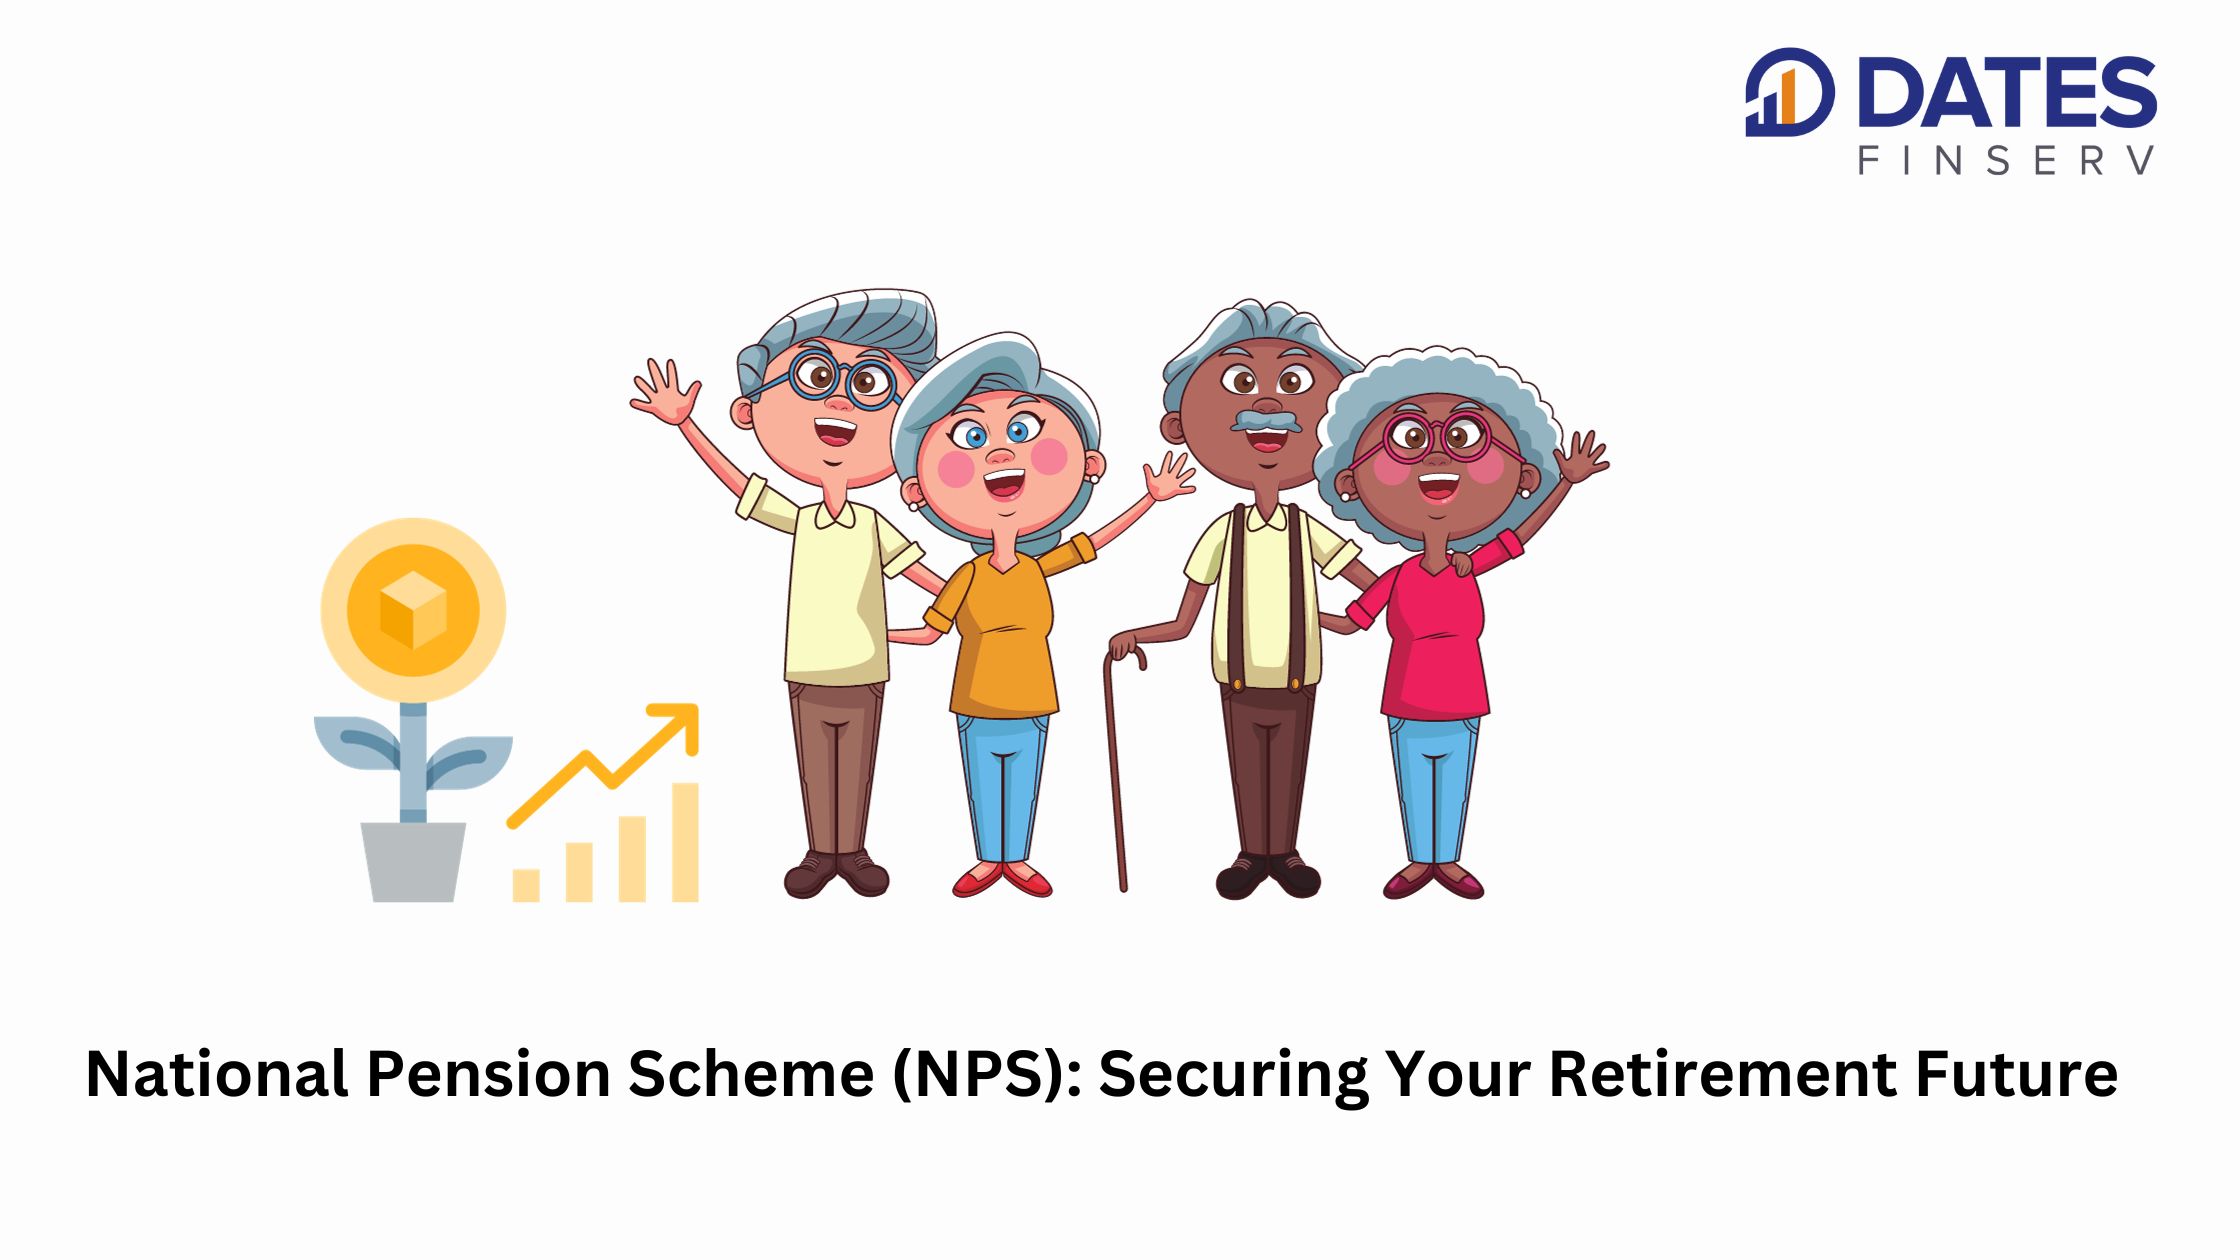 National Pension Scheme (NPS): Securing Your Retirement Future